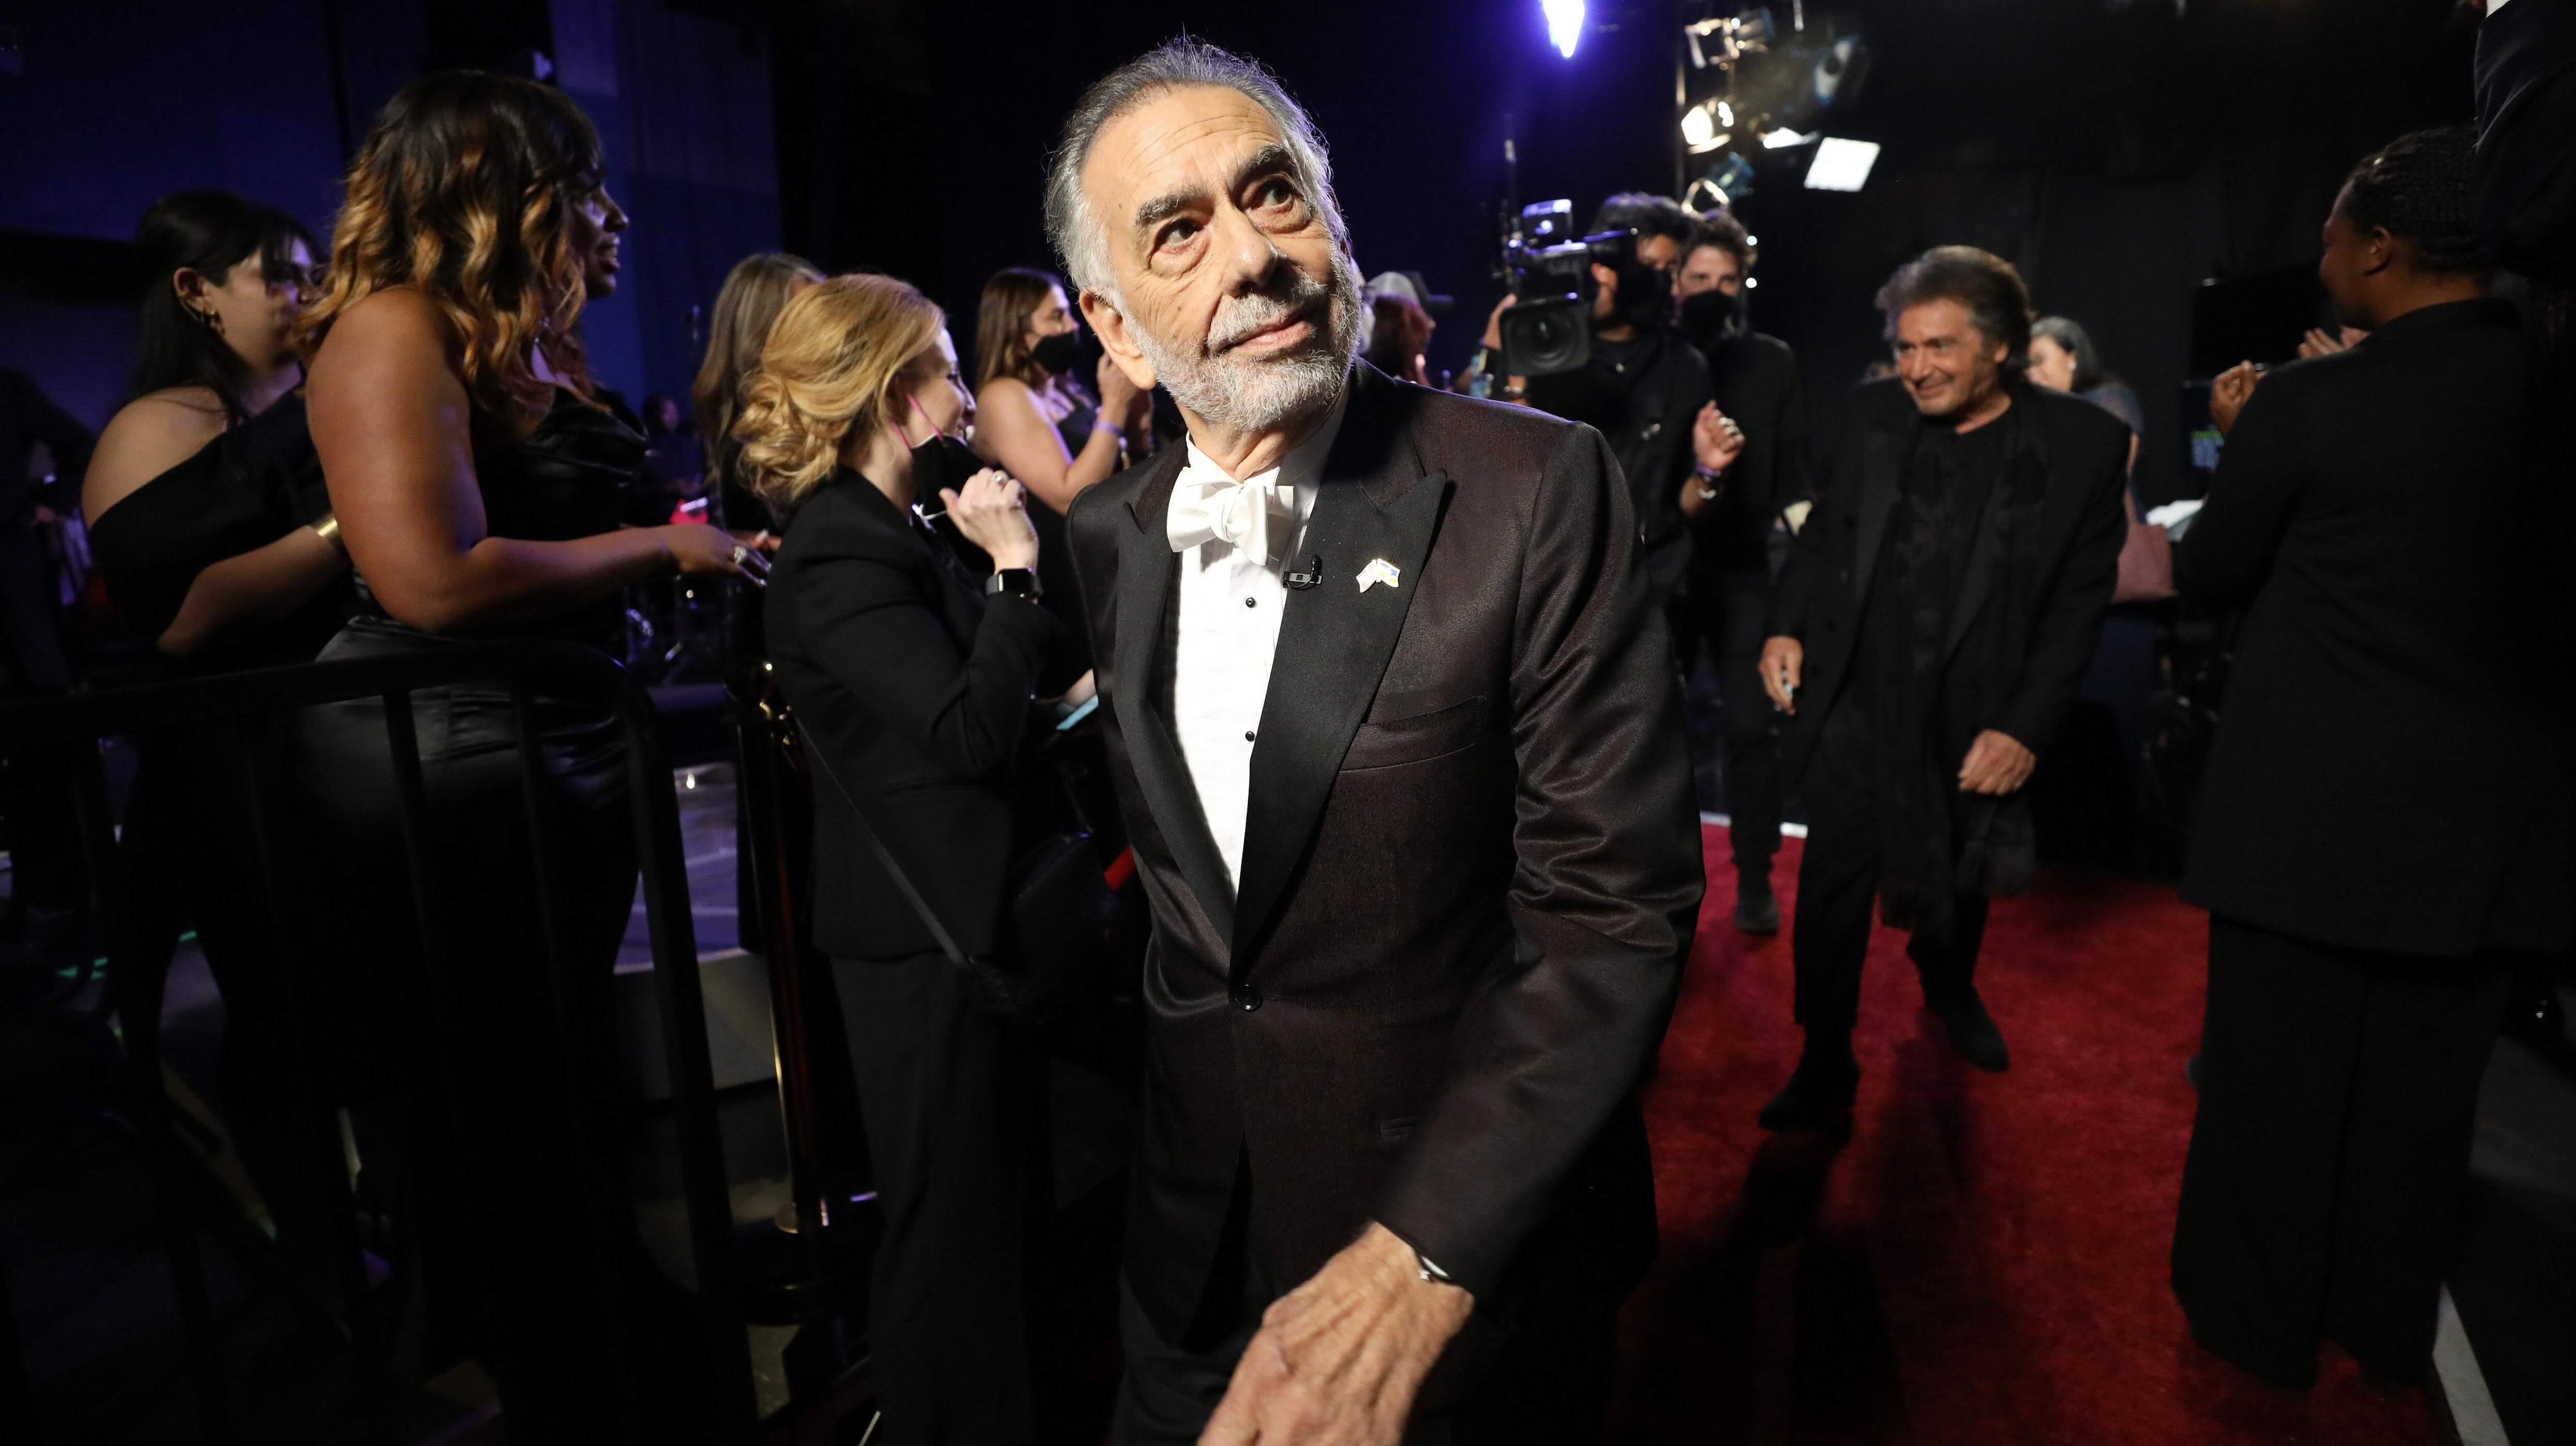 Francis Ford Coppola has at least one more film in him after Megalopolis